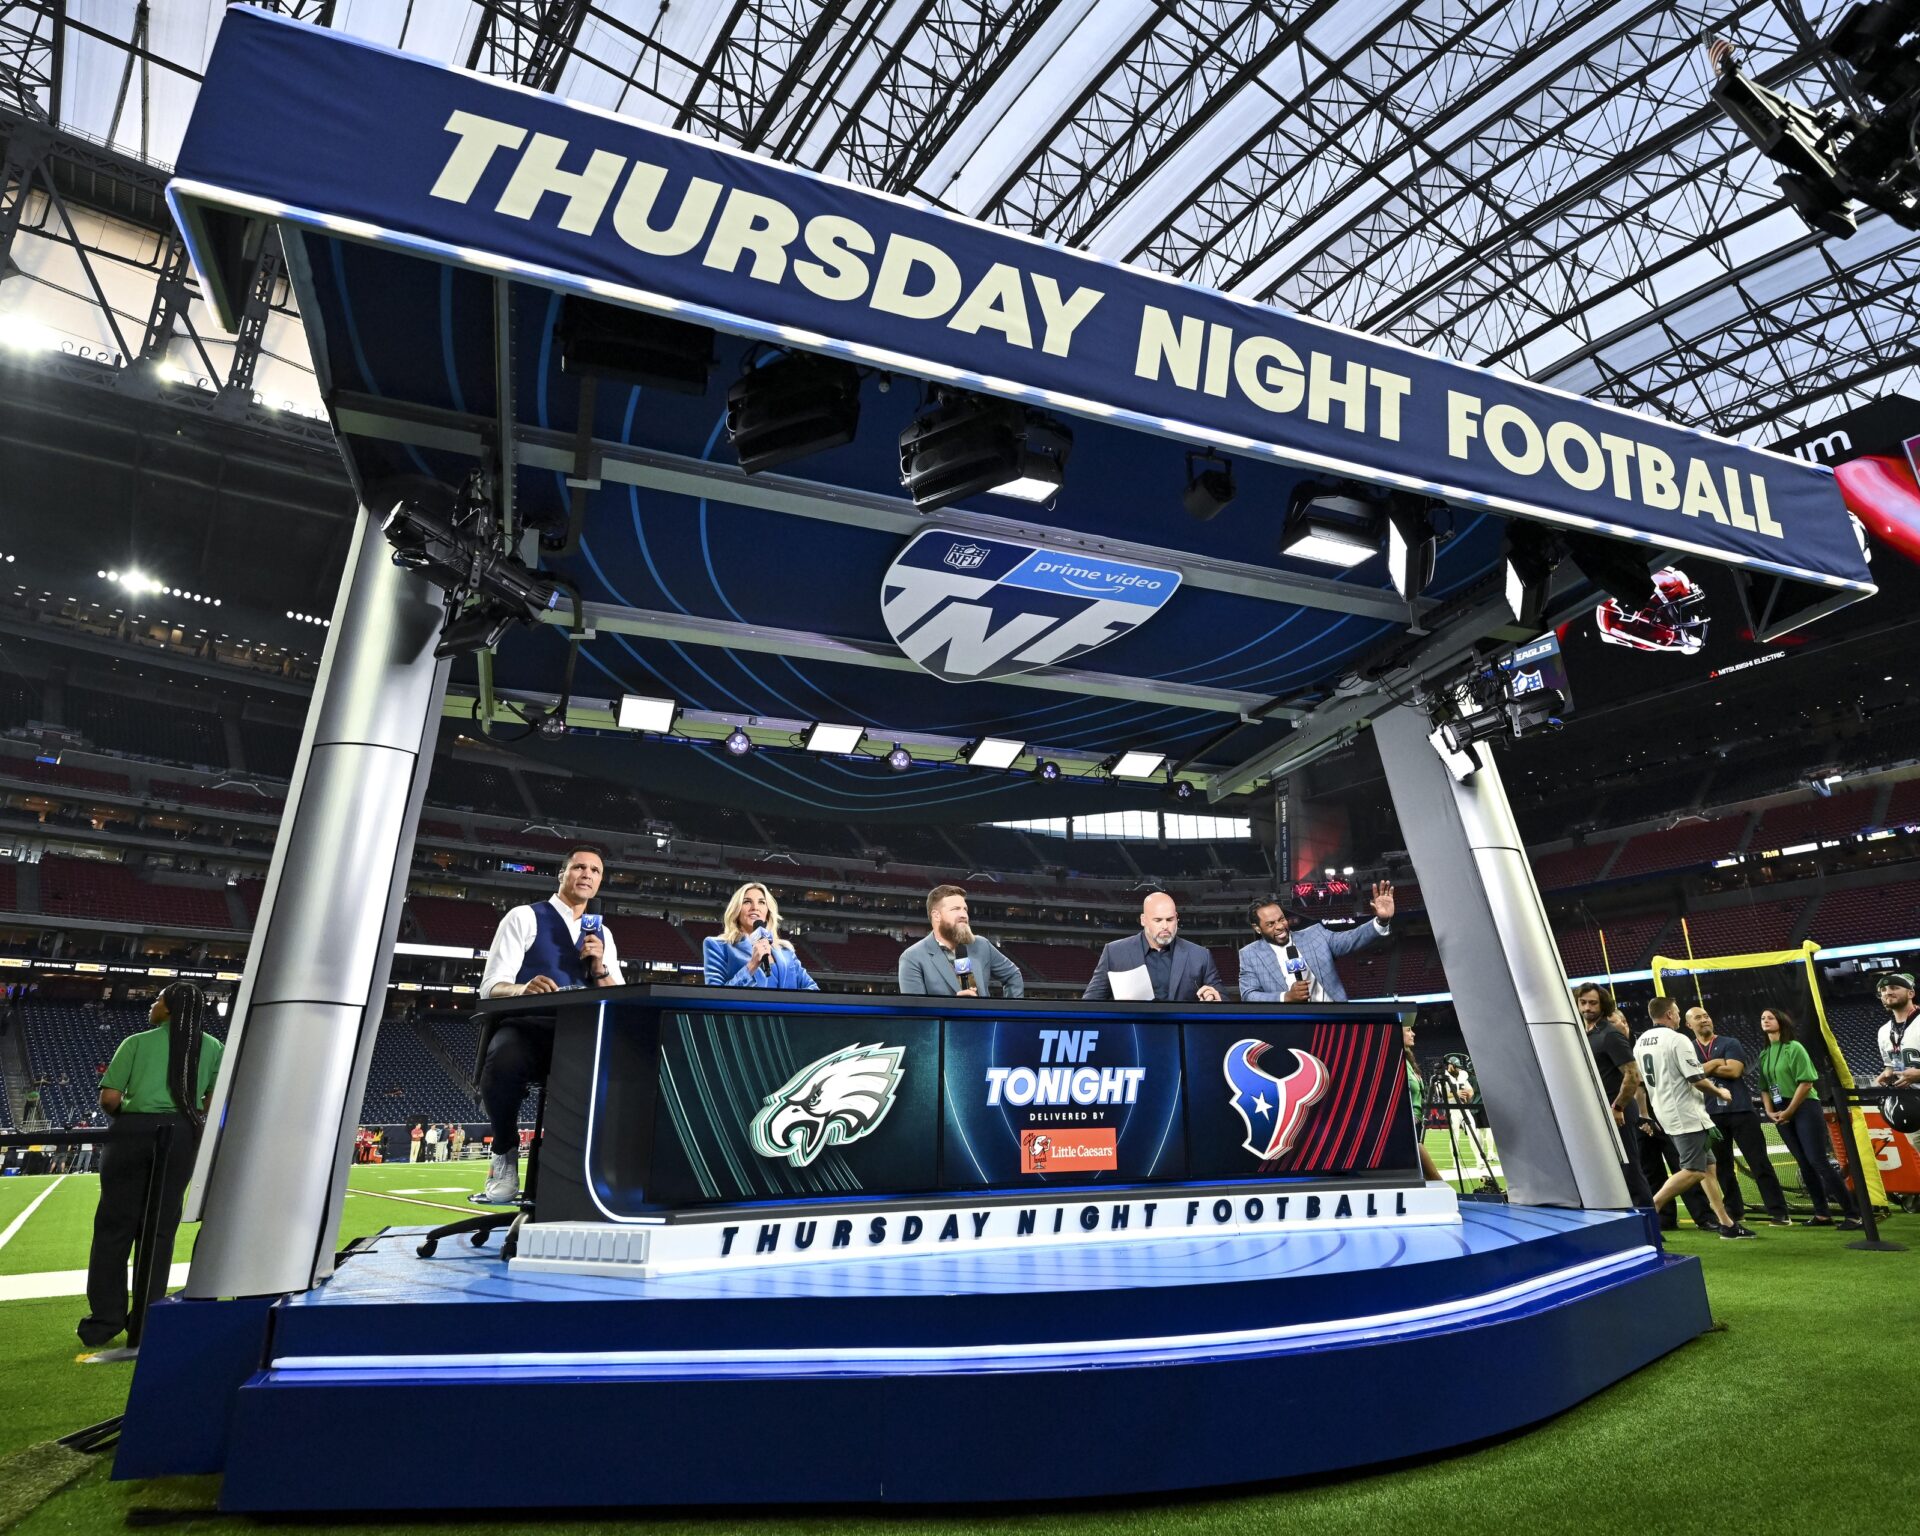 A view of the Thursday Night Football pre-game stage with Tony Gonzalez, Charissa Thompson, Ryan Fitzpatrick, Andrew Whitworth, Richard Sherman (from left to right) prior to the game between the Houston Texans and the Philadelphia Eagles at NRG Stadium.